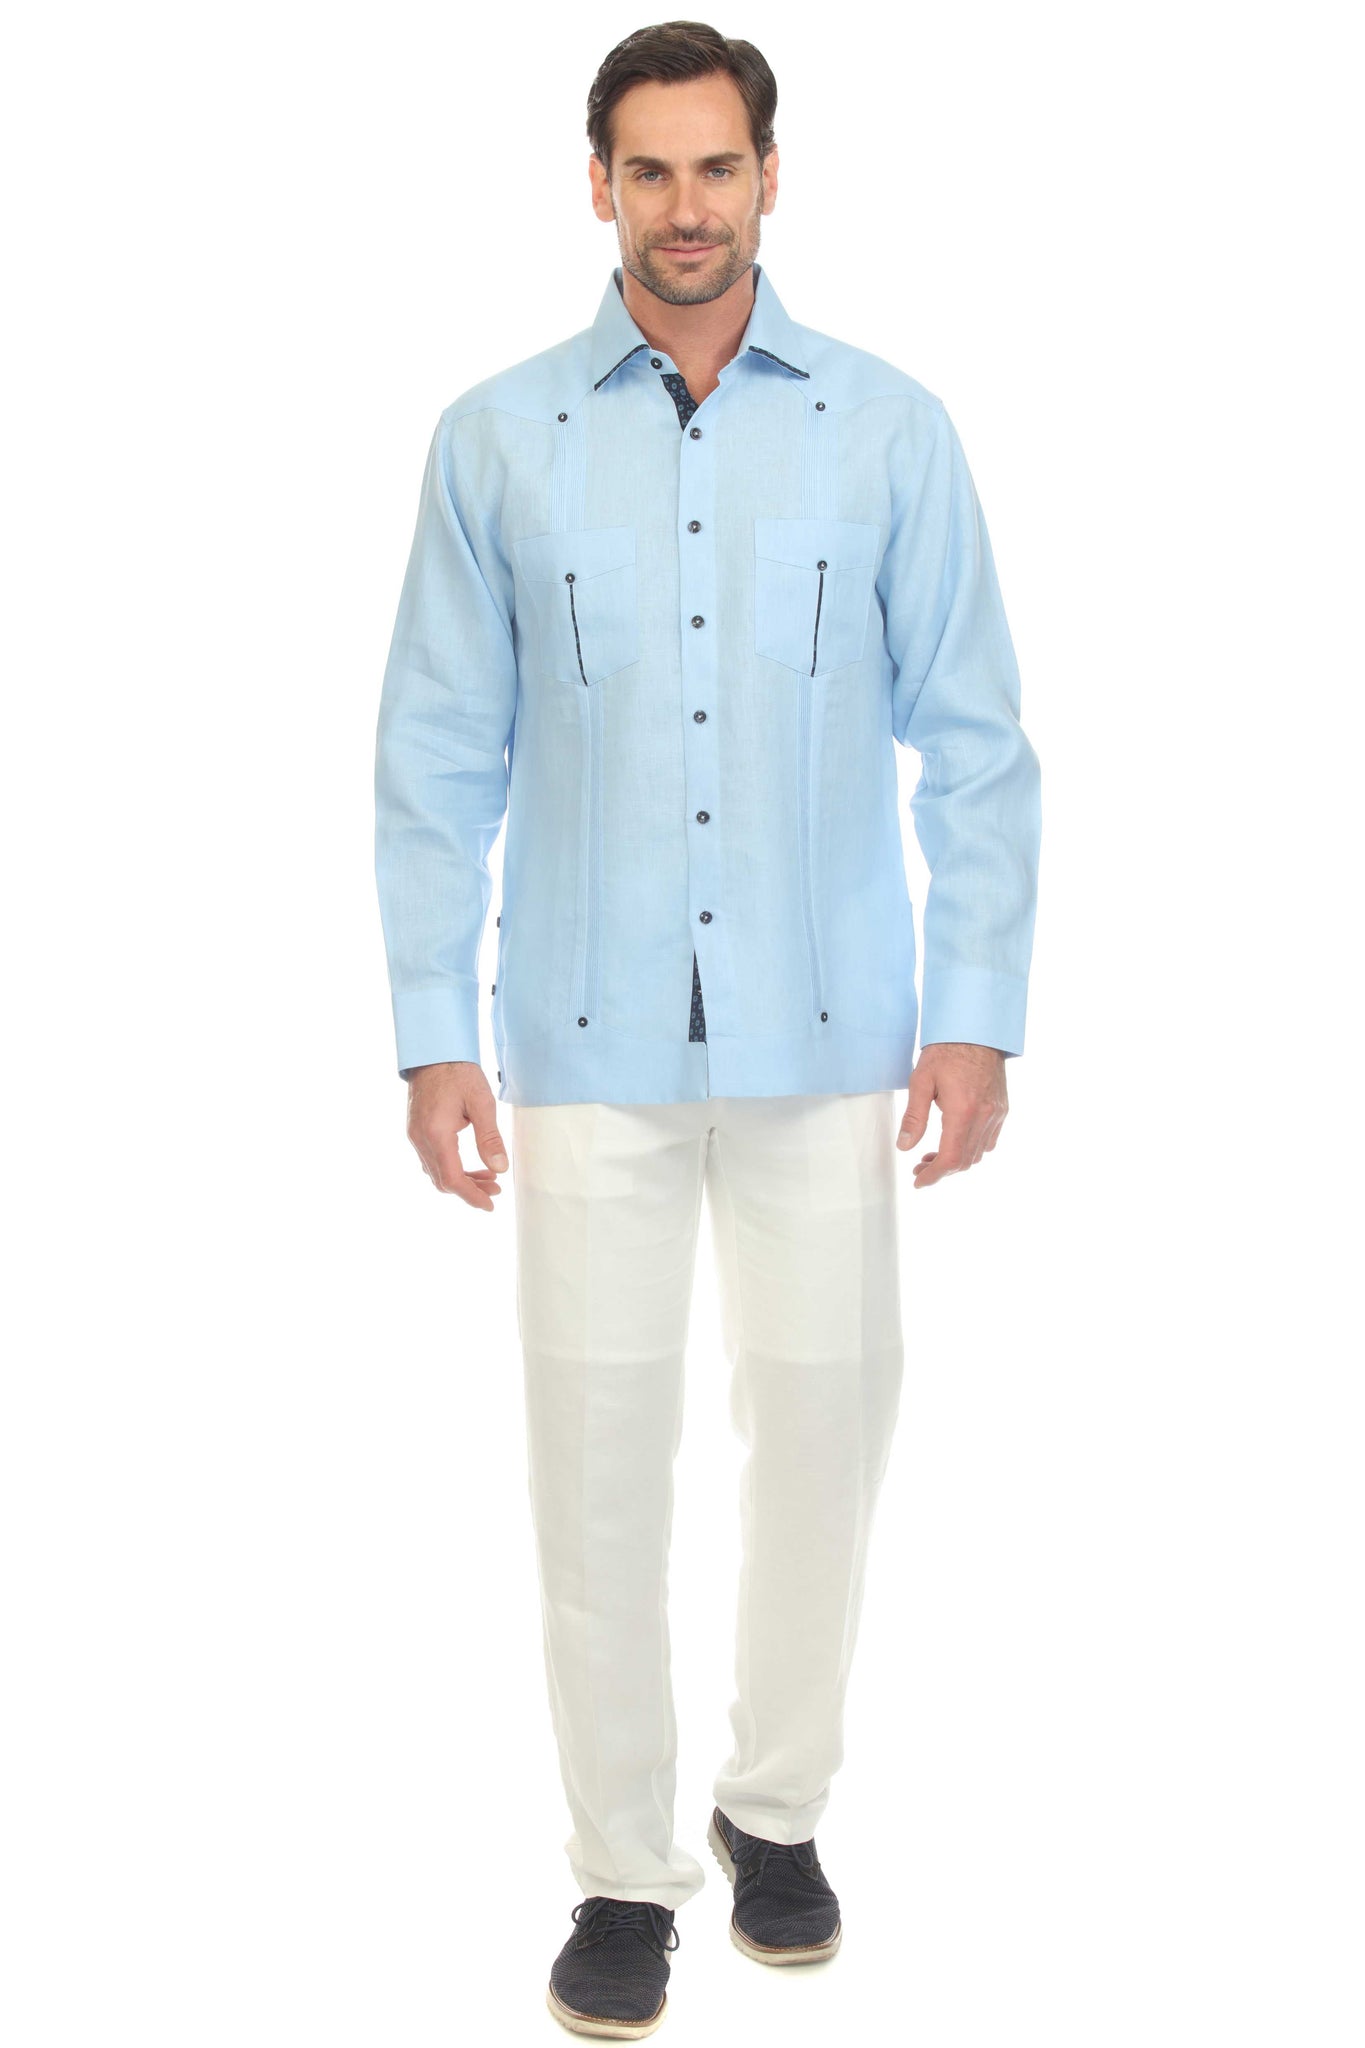 Mojito Men's 100% Linen Guayabera Shirt Long Sleeve with Solid Color Trim Accent